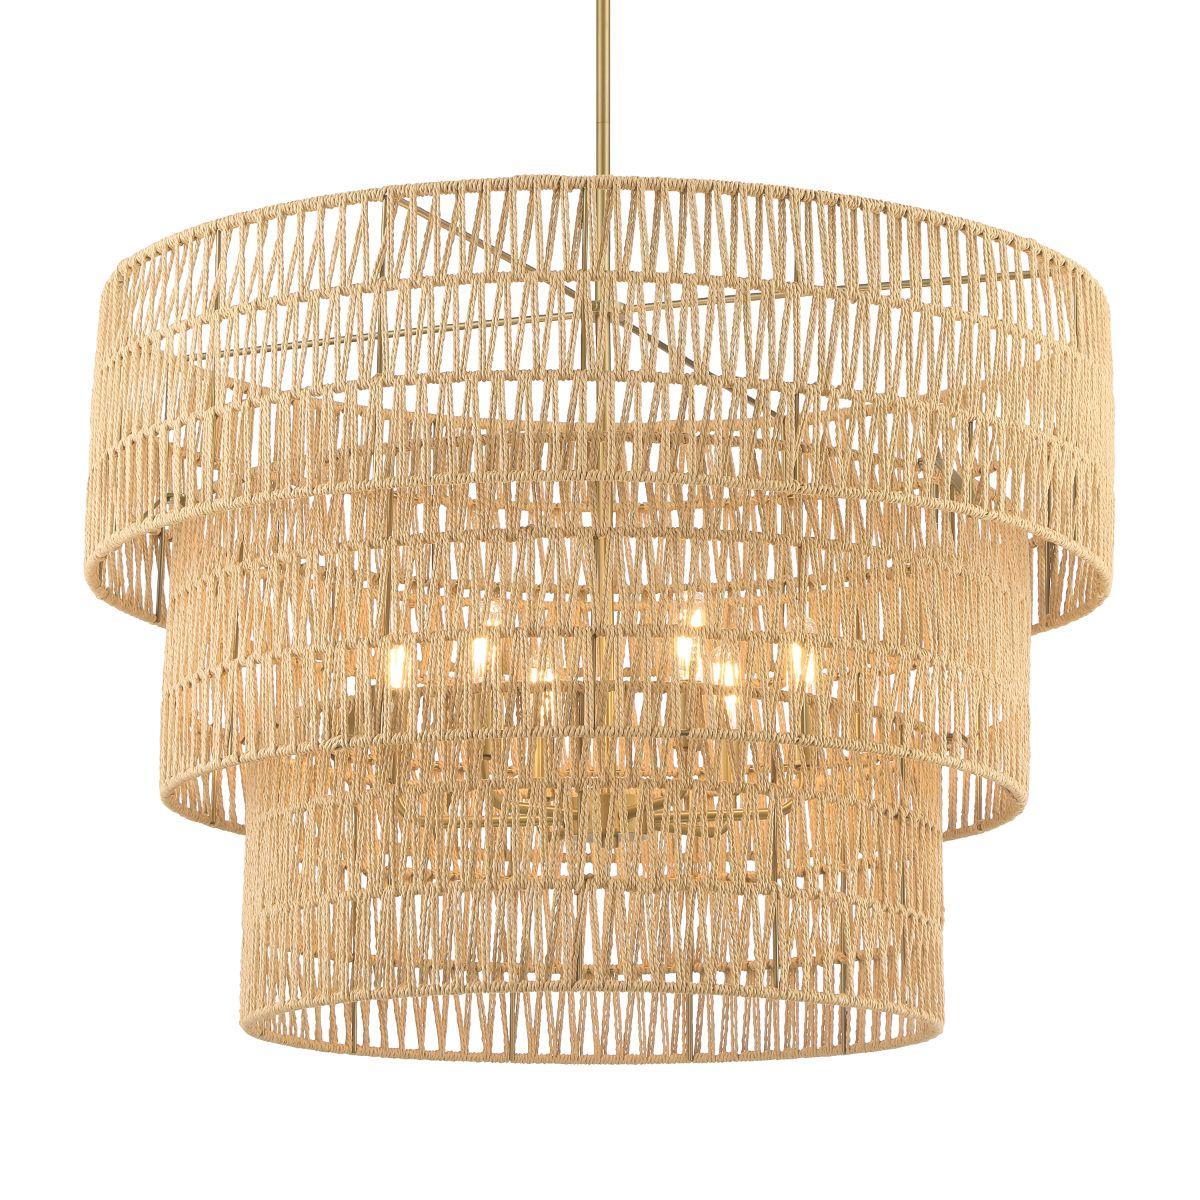 Beautiful Brass Lighting Options for Your Home